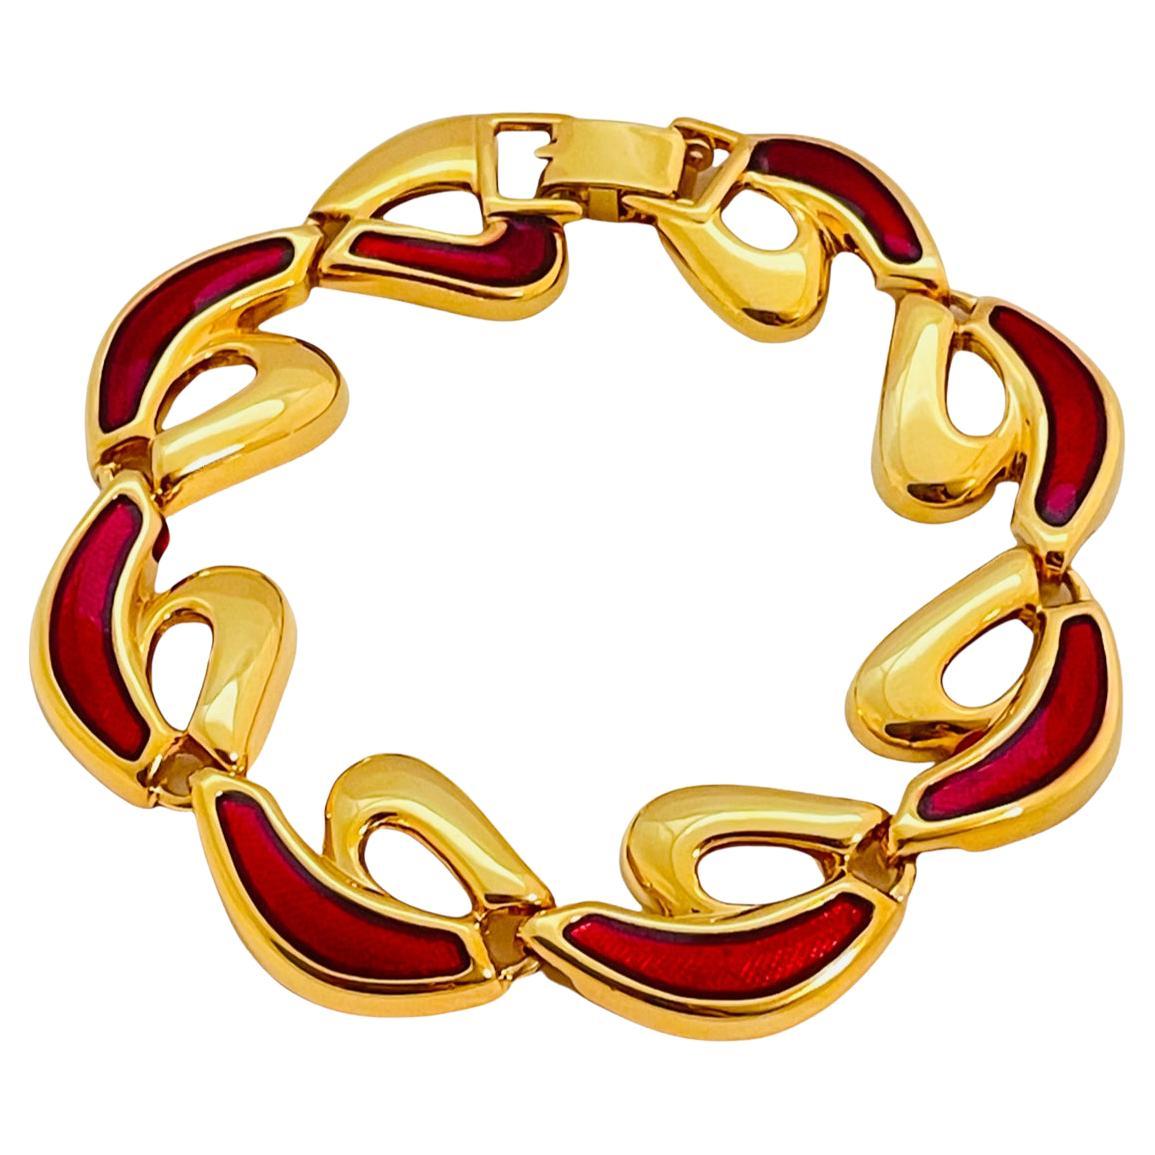 Vintage Gold Link rot emailliert Armband